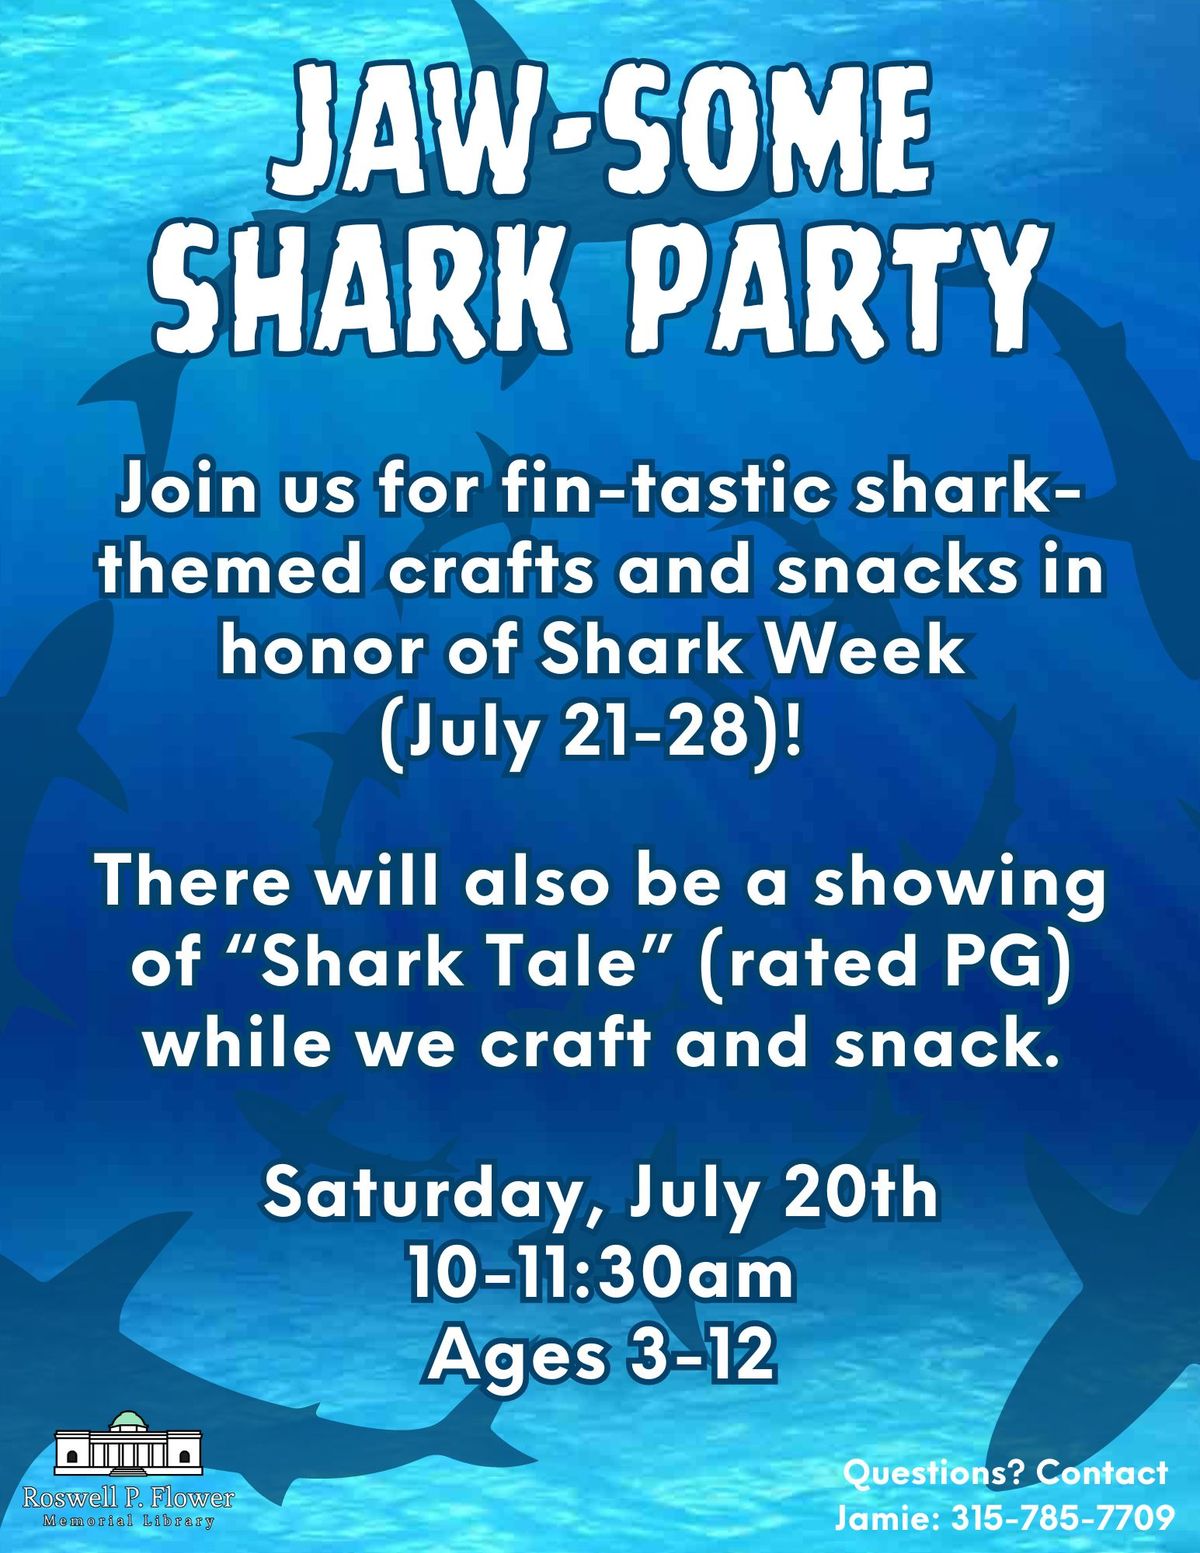 Ages 3-12 Jaw-some Shark Party